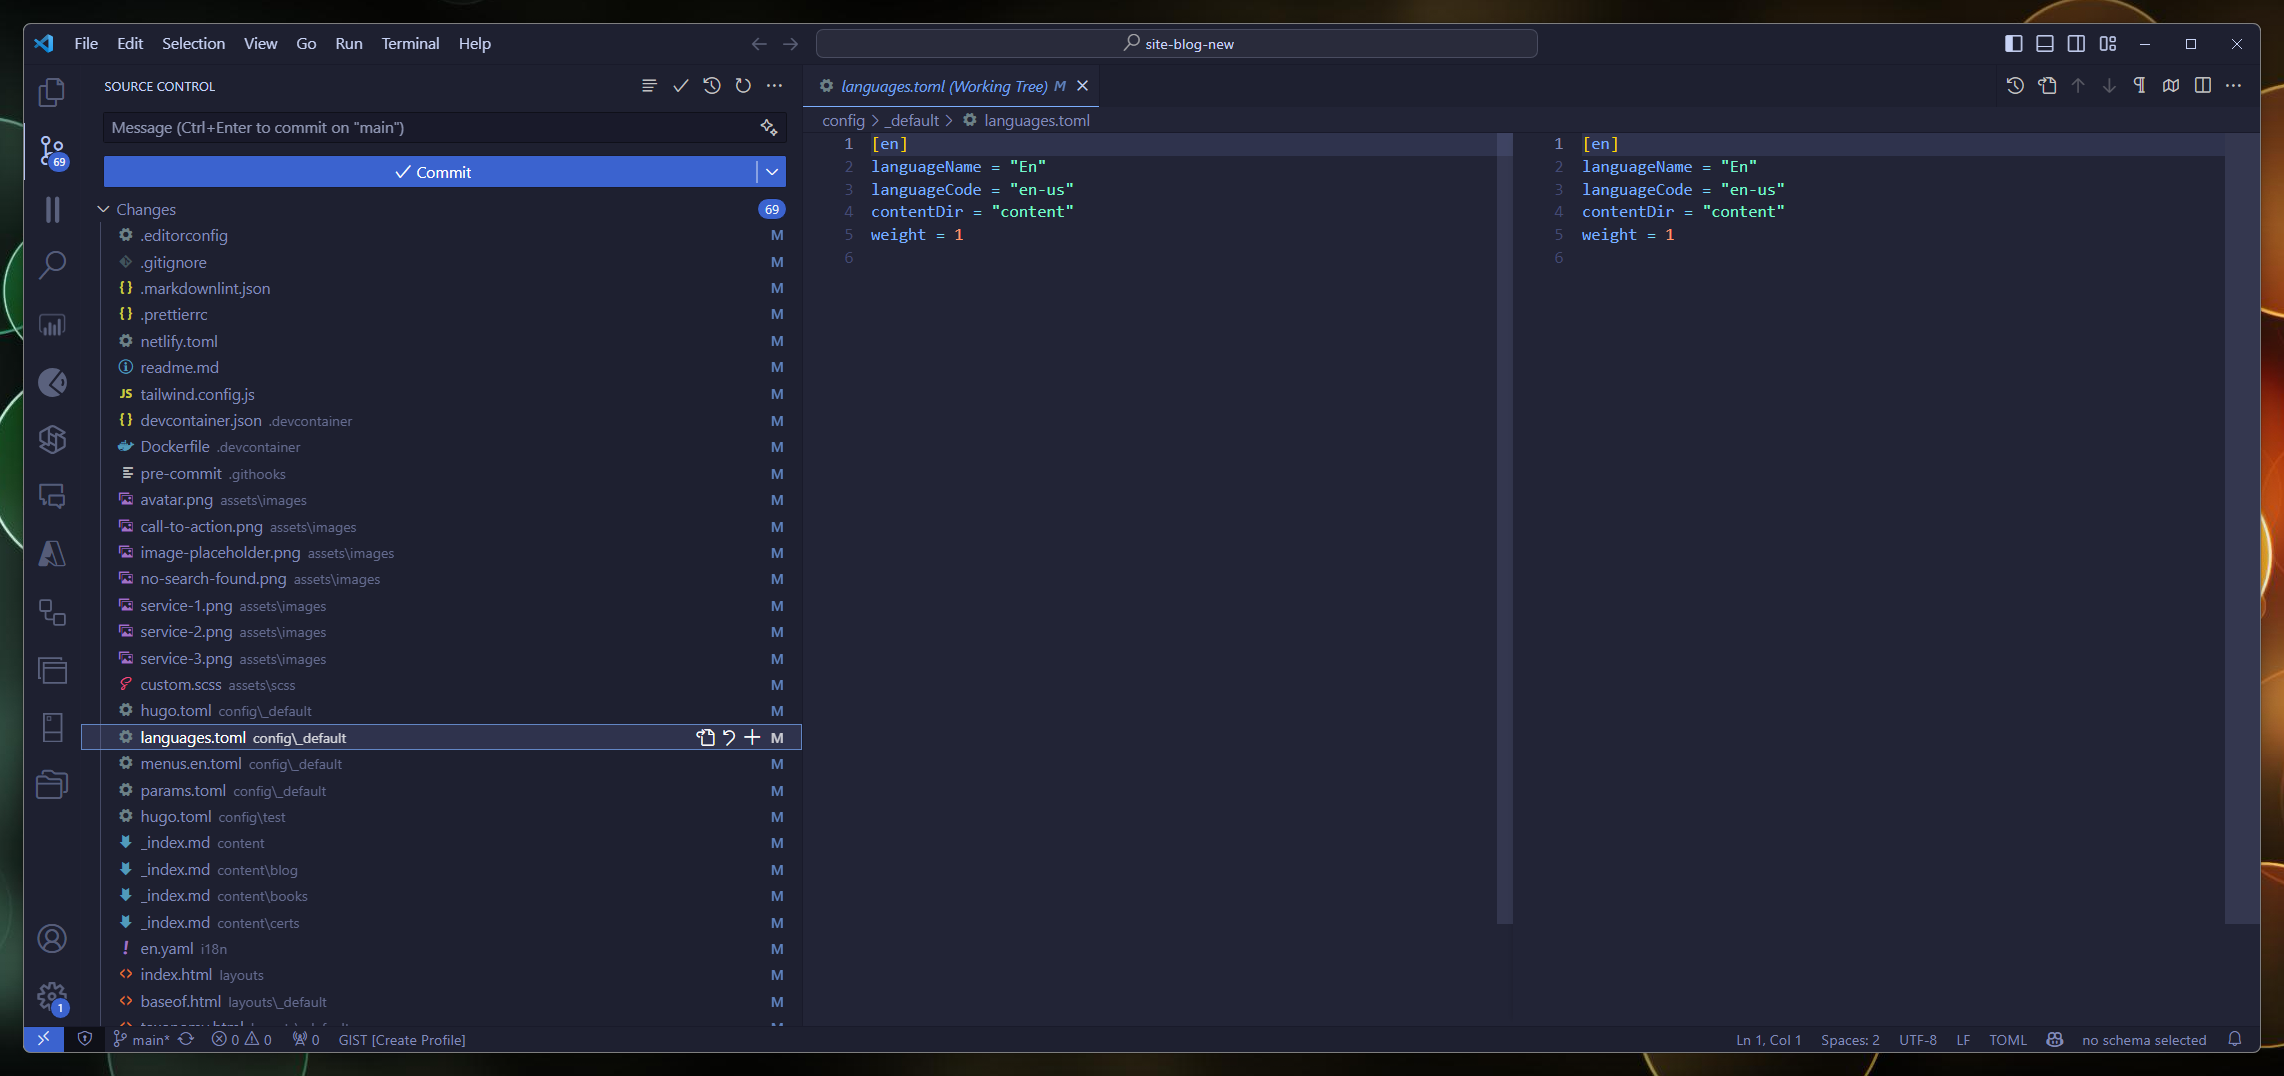 A screenshot of VS Code in Windows showing 69 changes, the comparison of the before and after of the selected file is consistent.